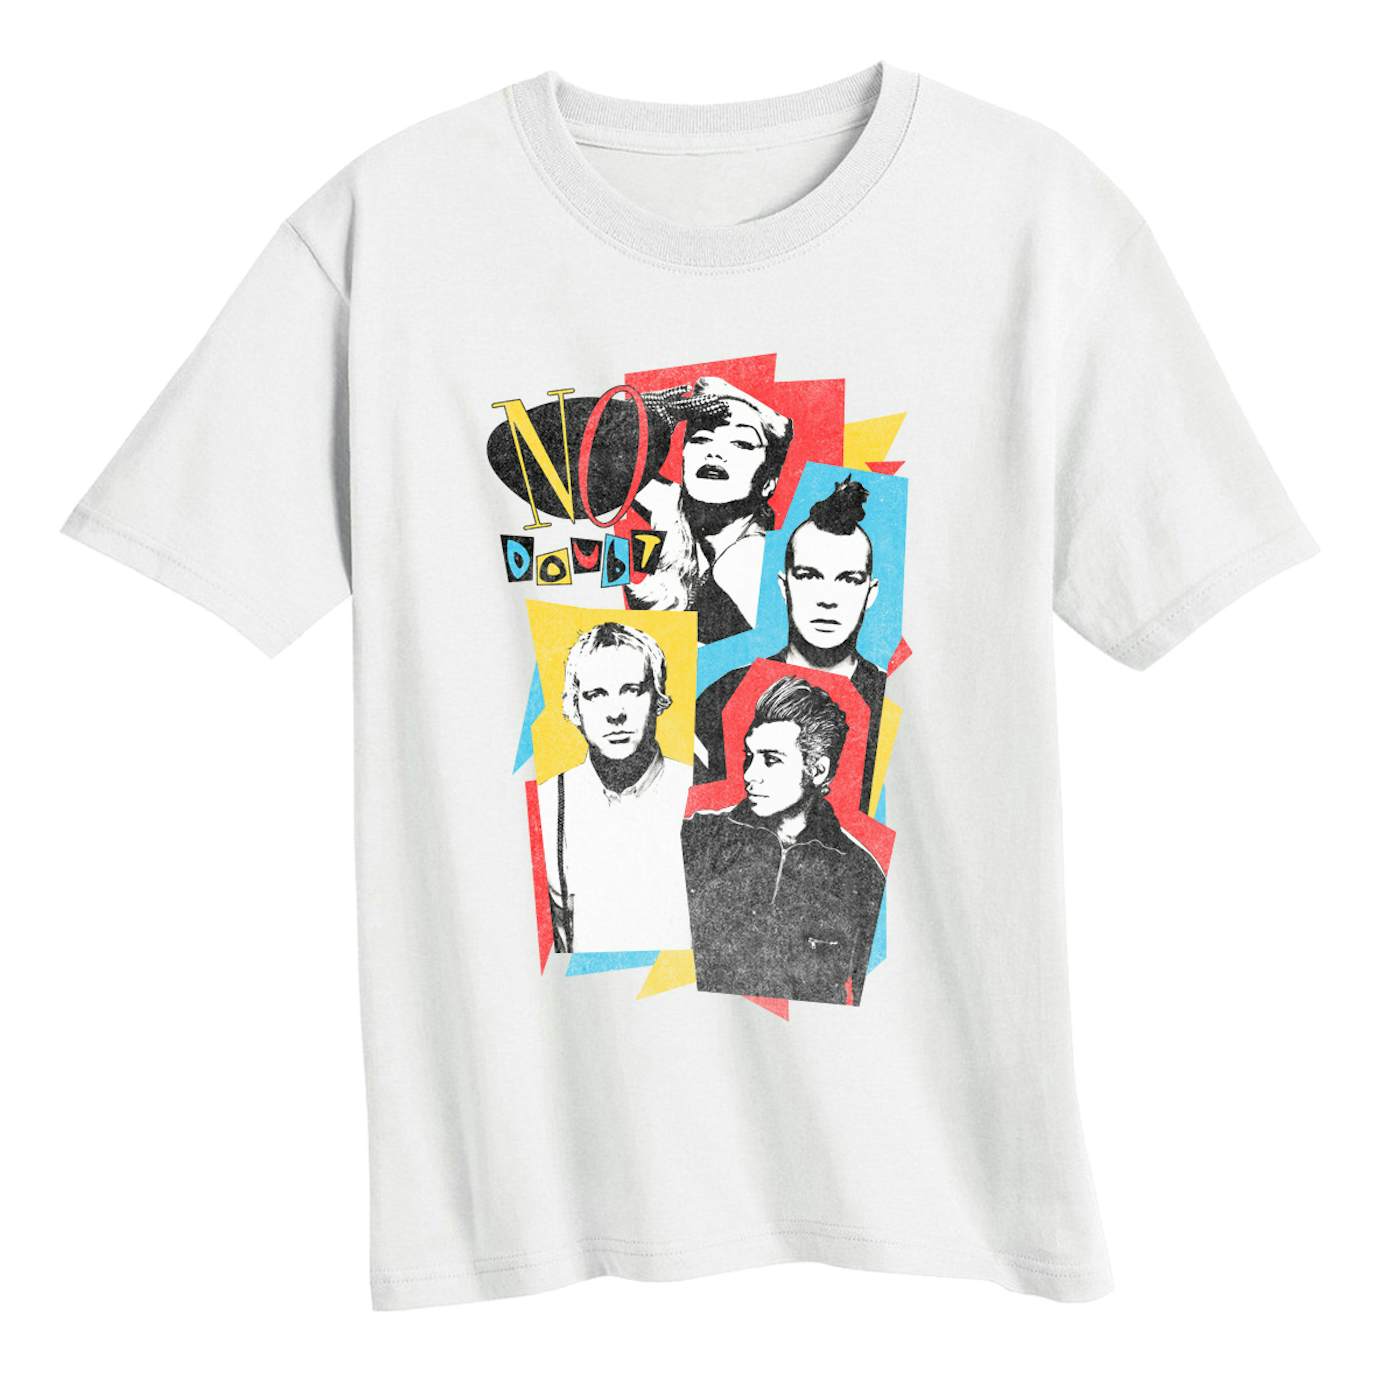 No Doubt Abstract Band Photo Youth T-Shirt